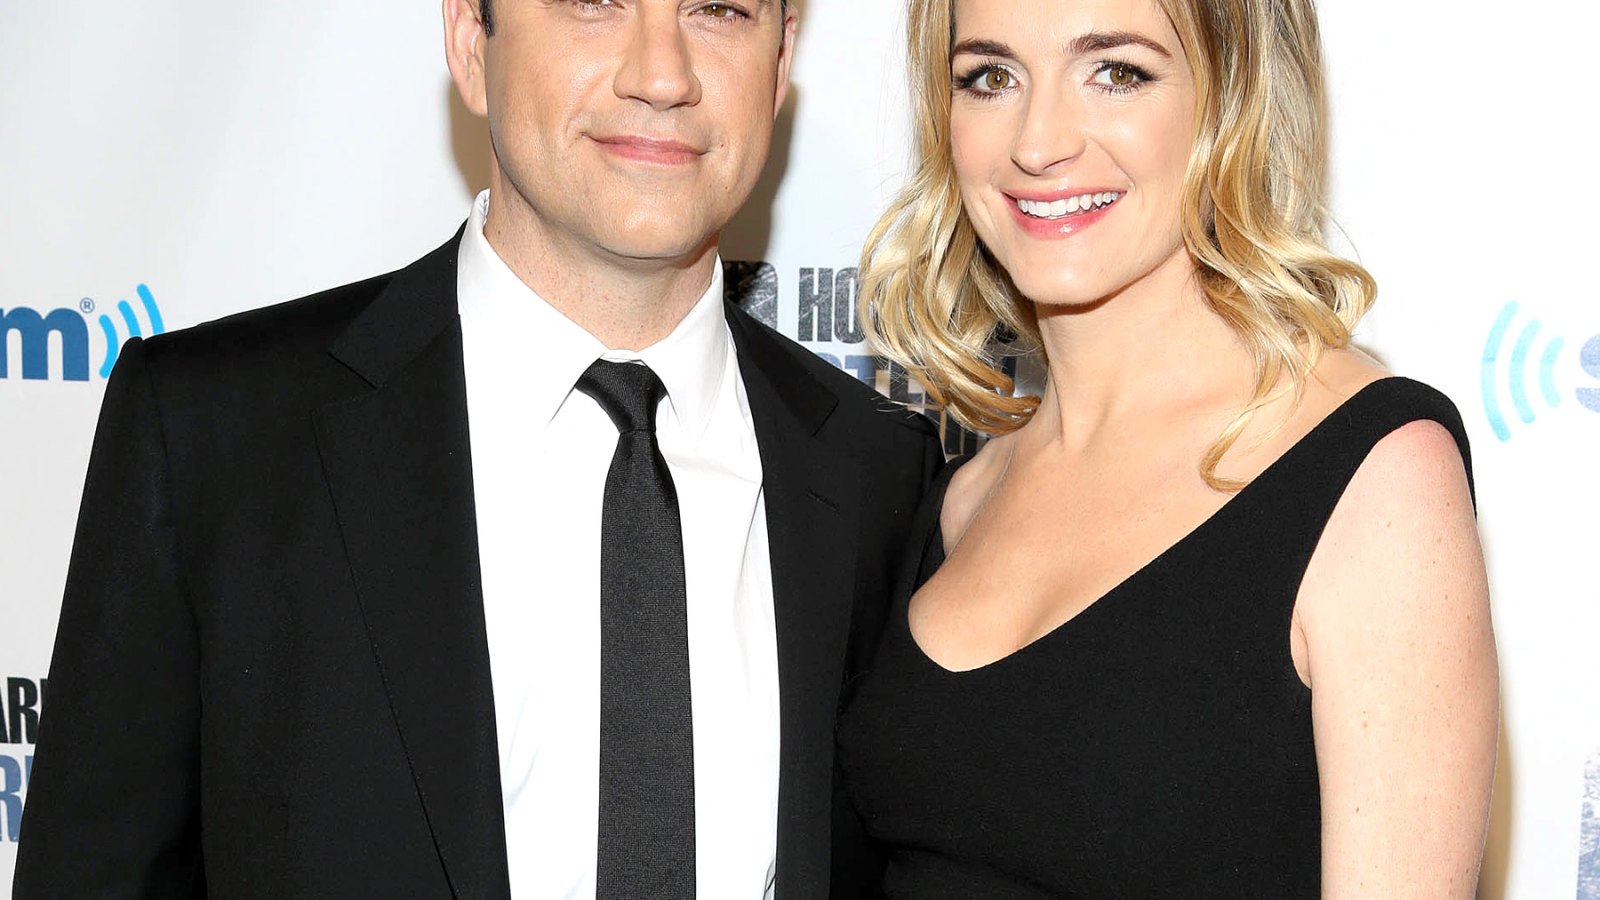 Jimmy Kimmel and Molly McNearney at Howard Stern's birthday party